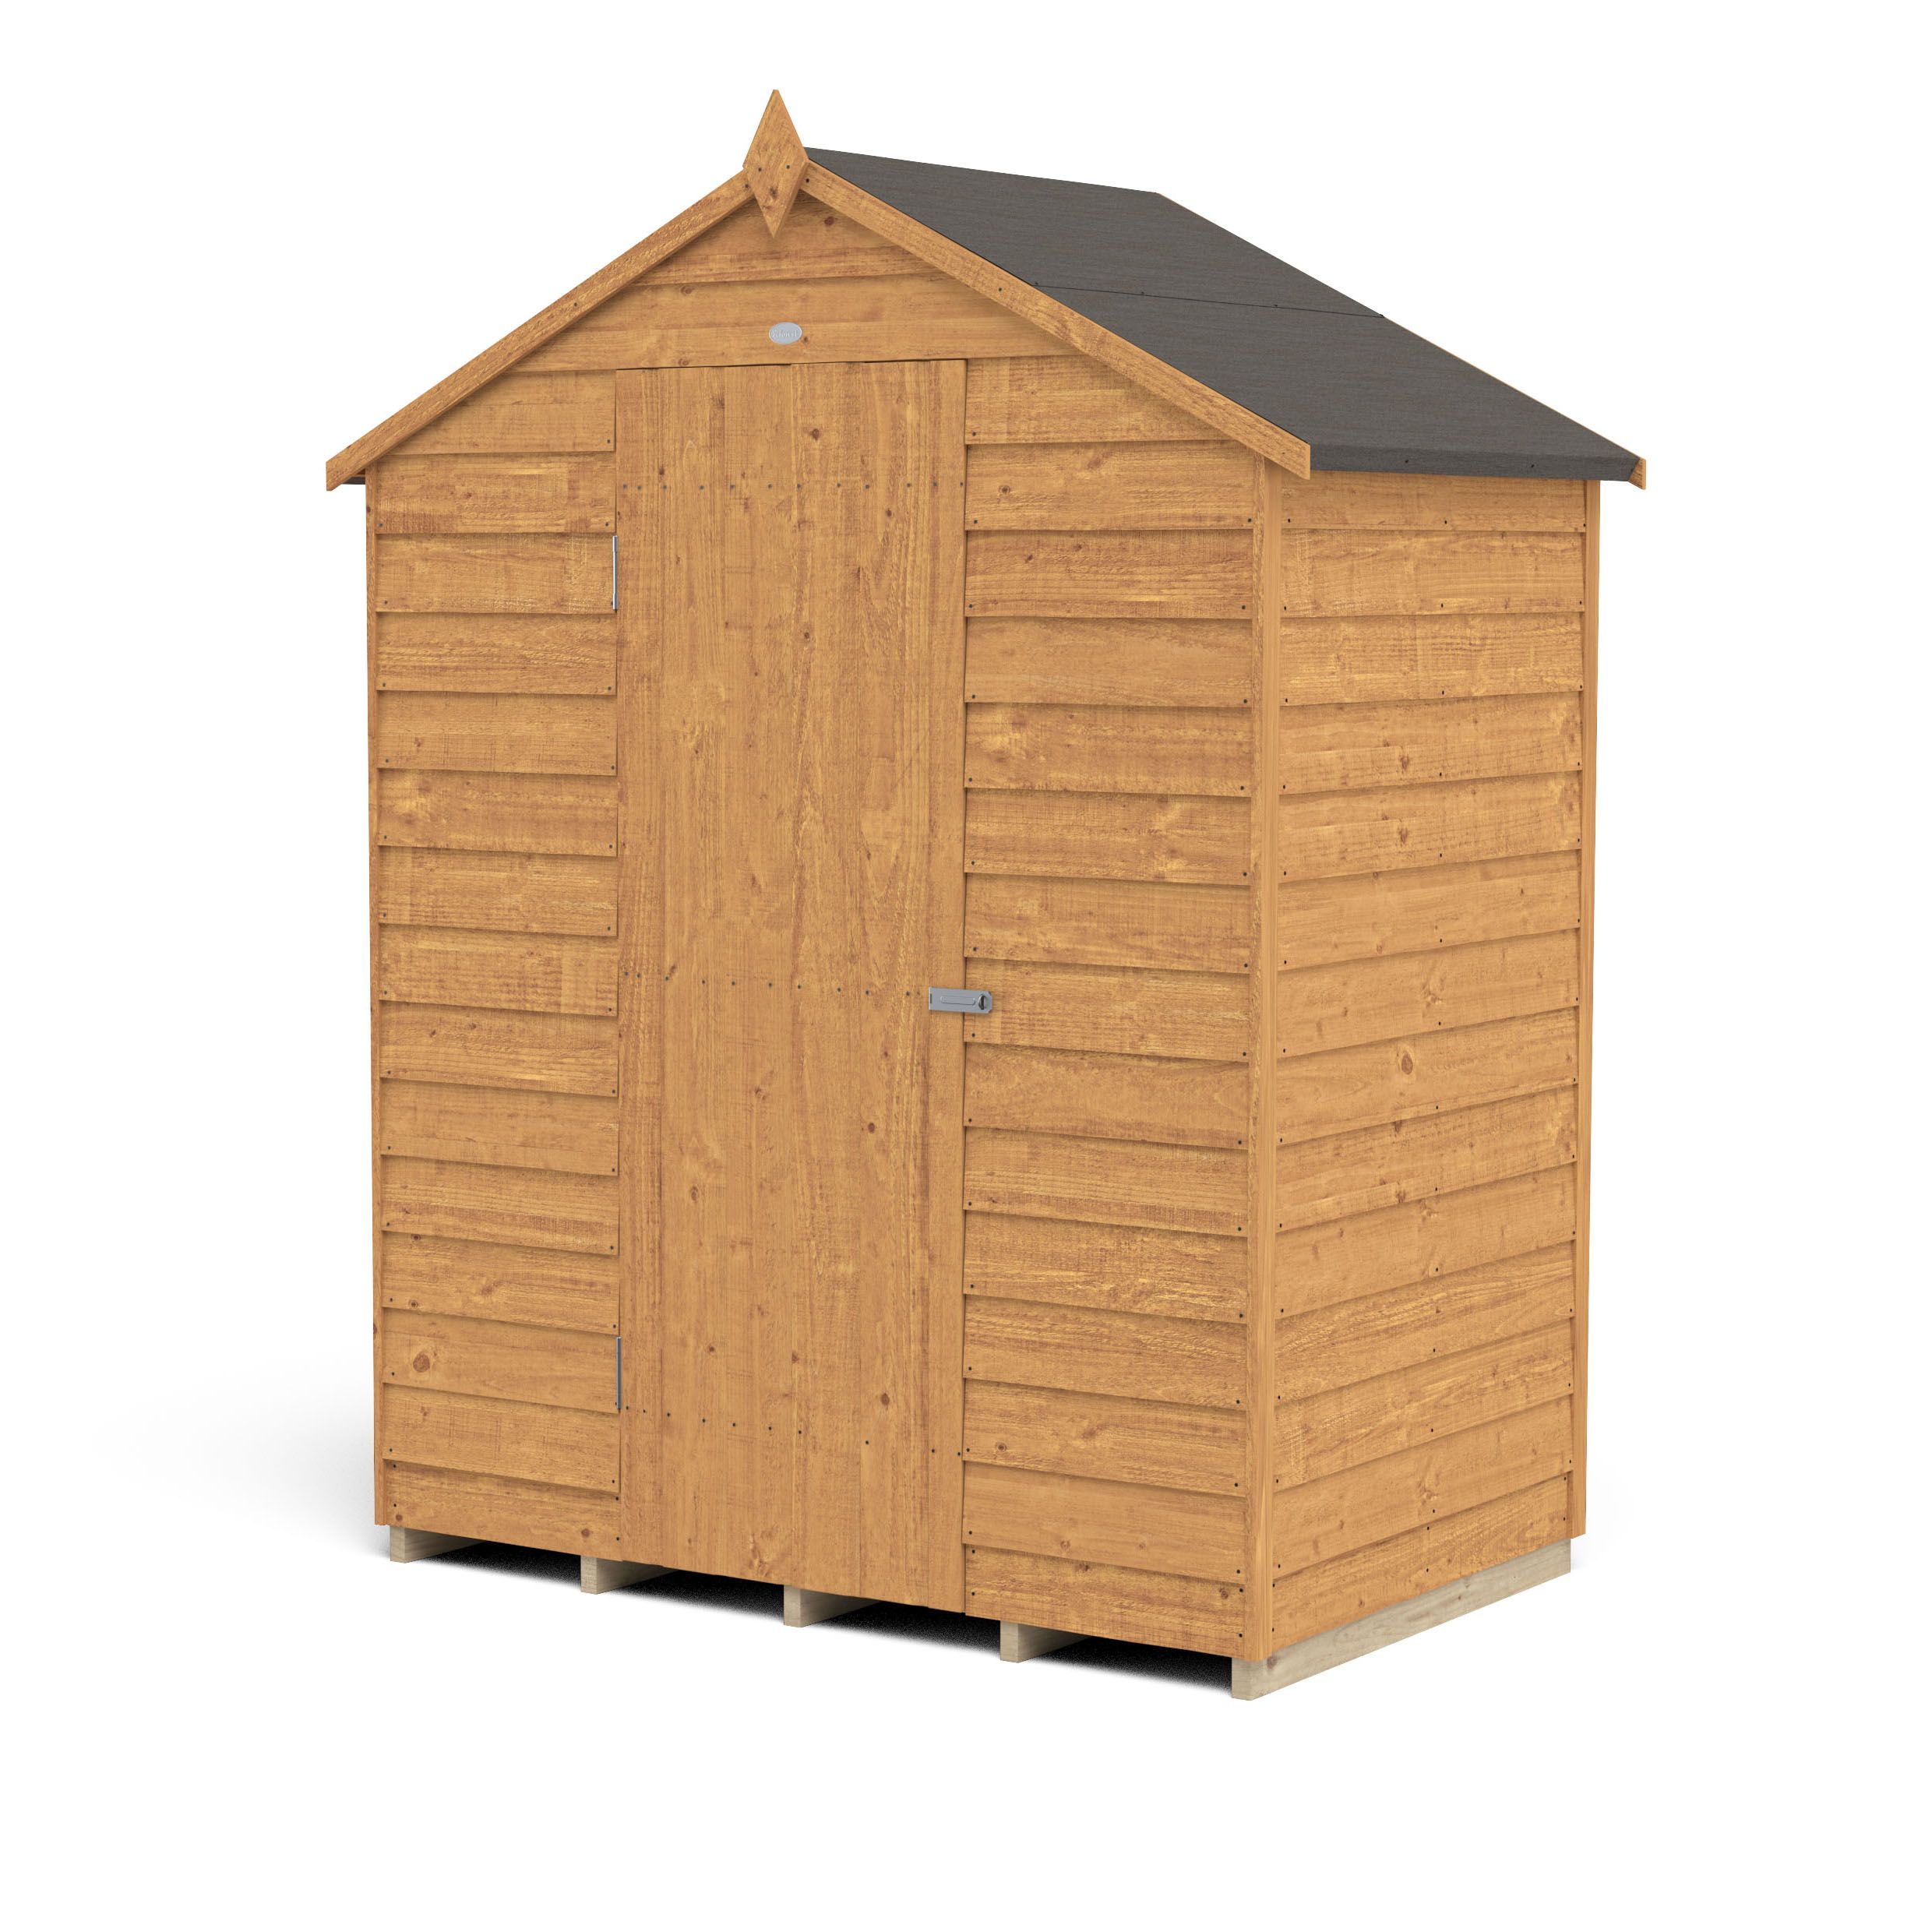 Forest Garden Overlap 5x3 ft Apex Wooden Shed with floor (Base included) - Assembly service included